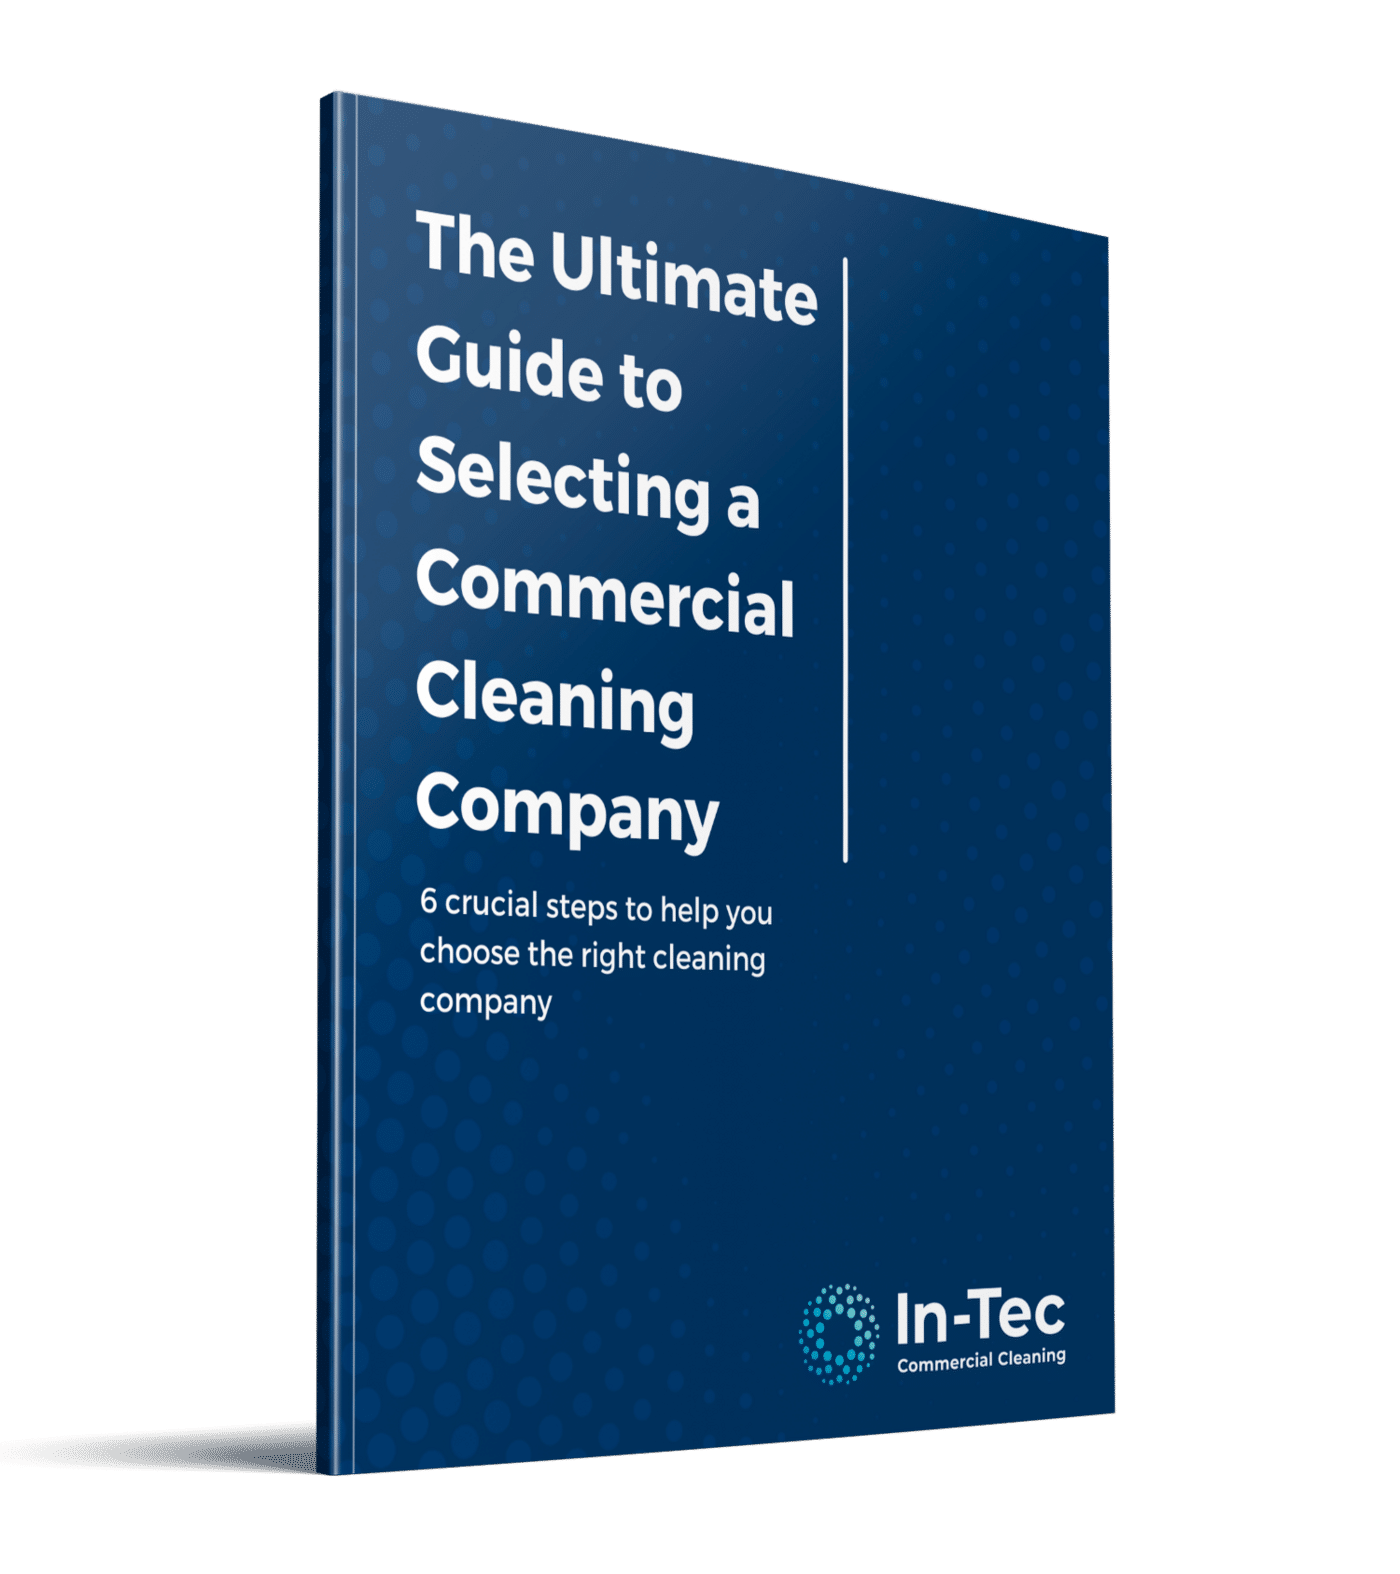 Mockup eBook - The Ultimate Guide to Selecting a Commercial Cleaning Company